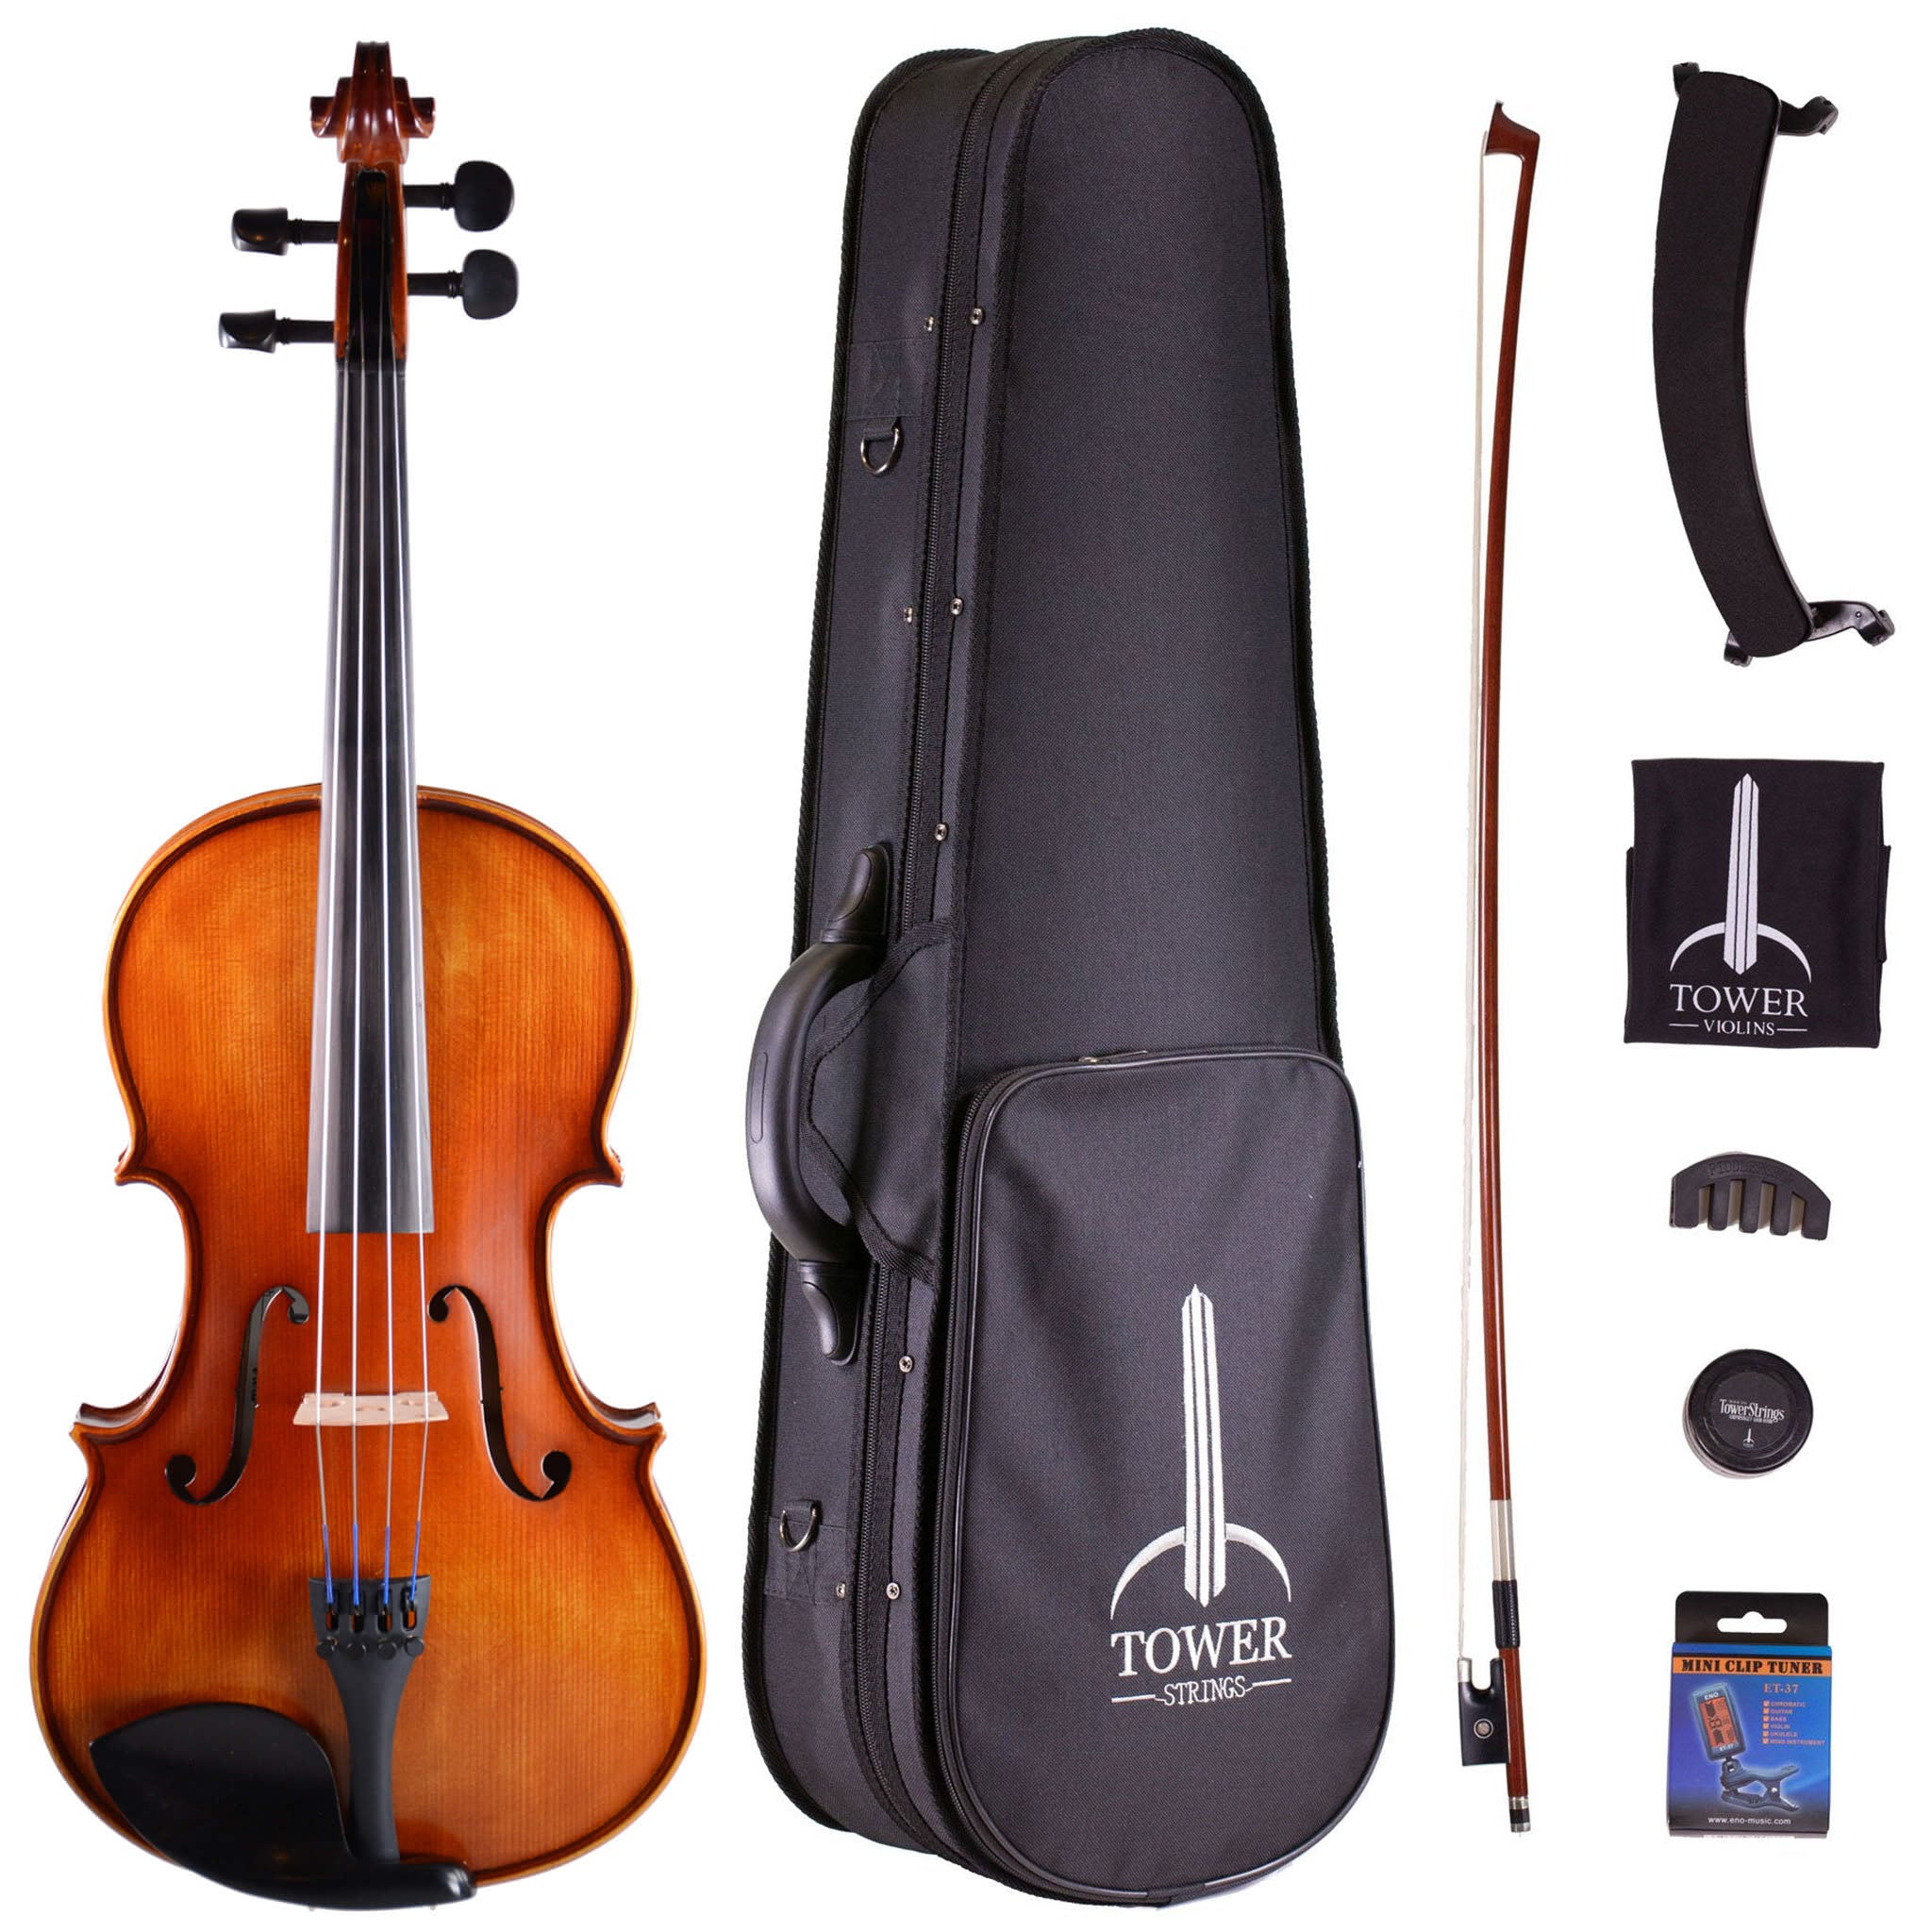 B-Stock Tower Strings Acoustic Electric Violin Outfit